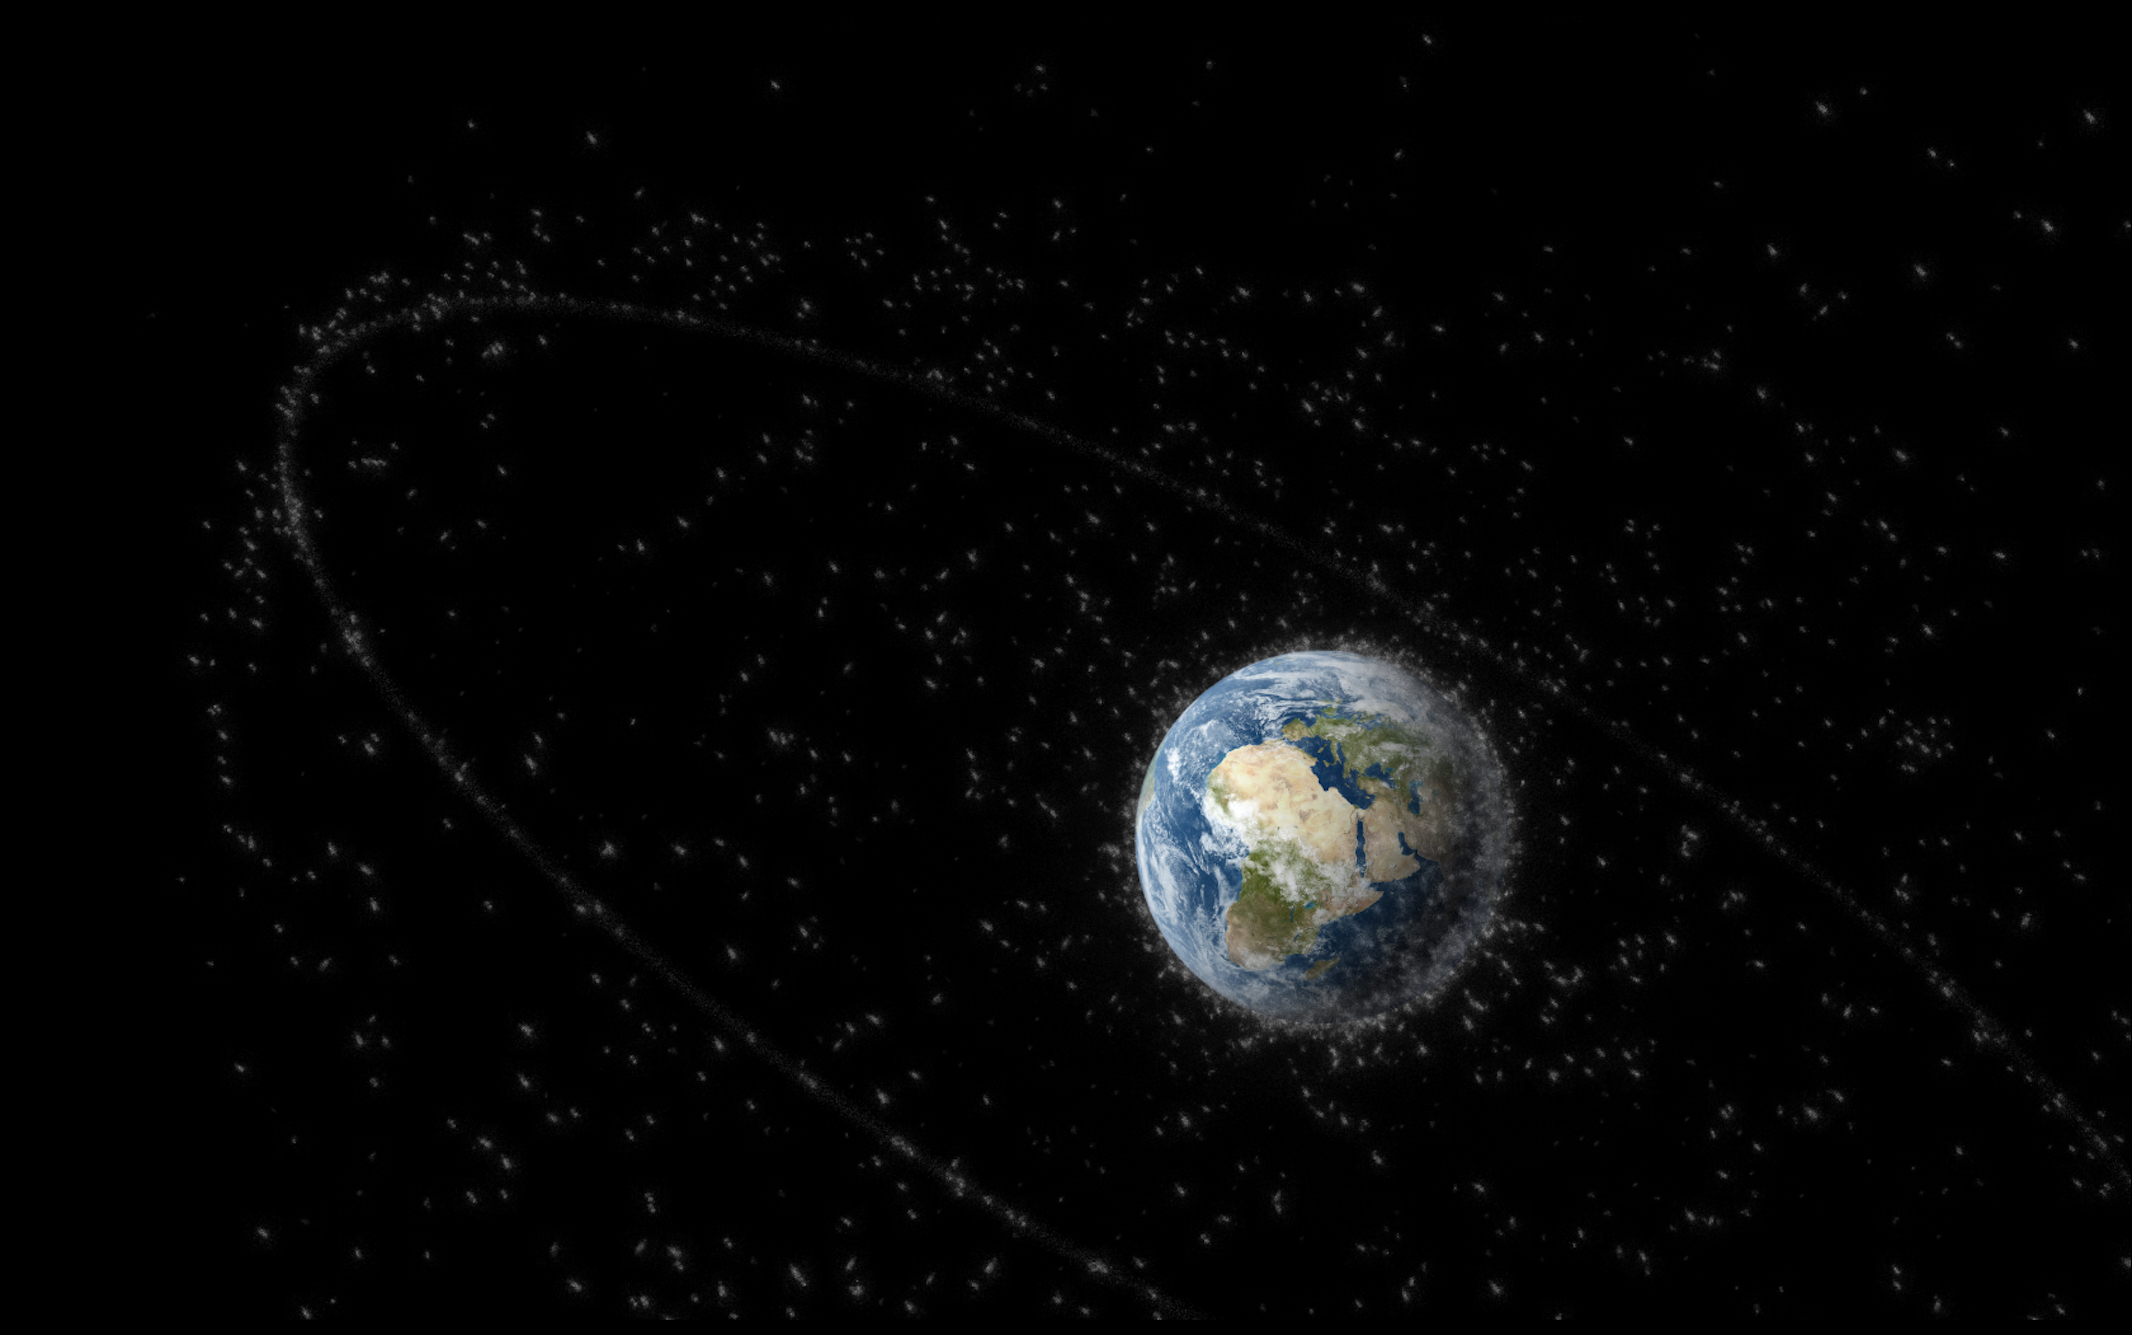 An artist’s impression of debris objects in orbit around Earth. Credit: ESA-P. Carril